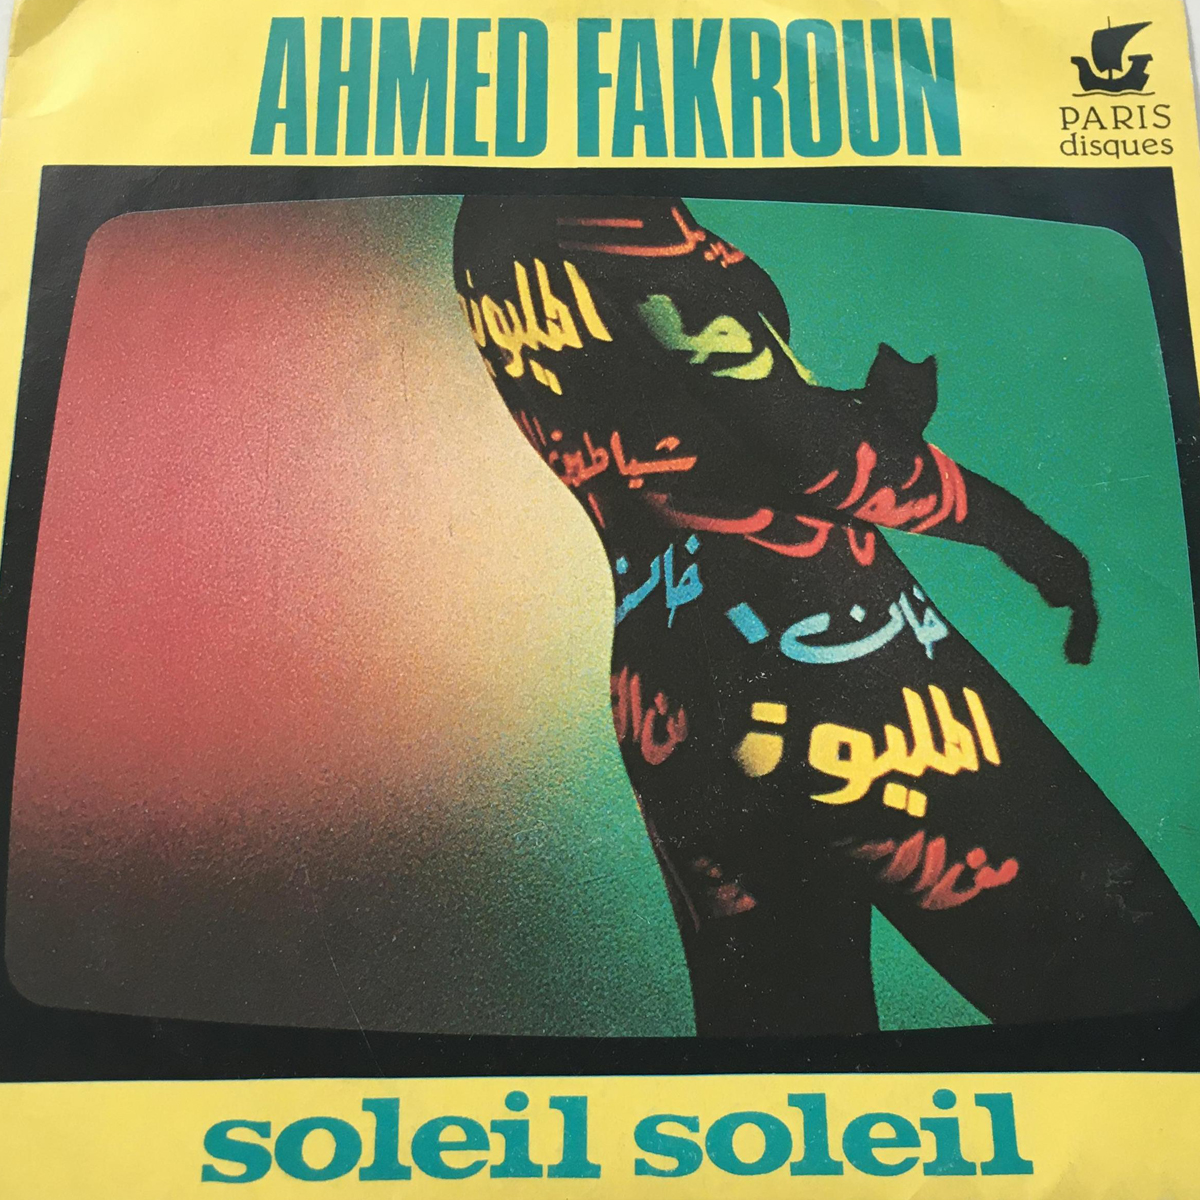 Ahmed Fakroun: rediscovered pioneer in modern Arabic music, live with Dutch-Turkish act Altin Gün